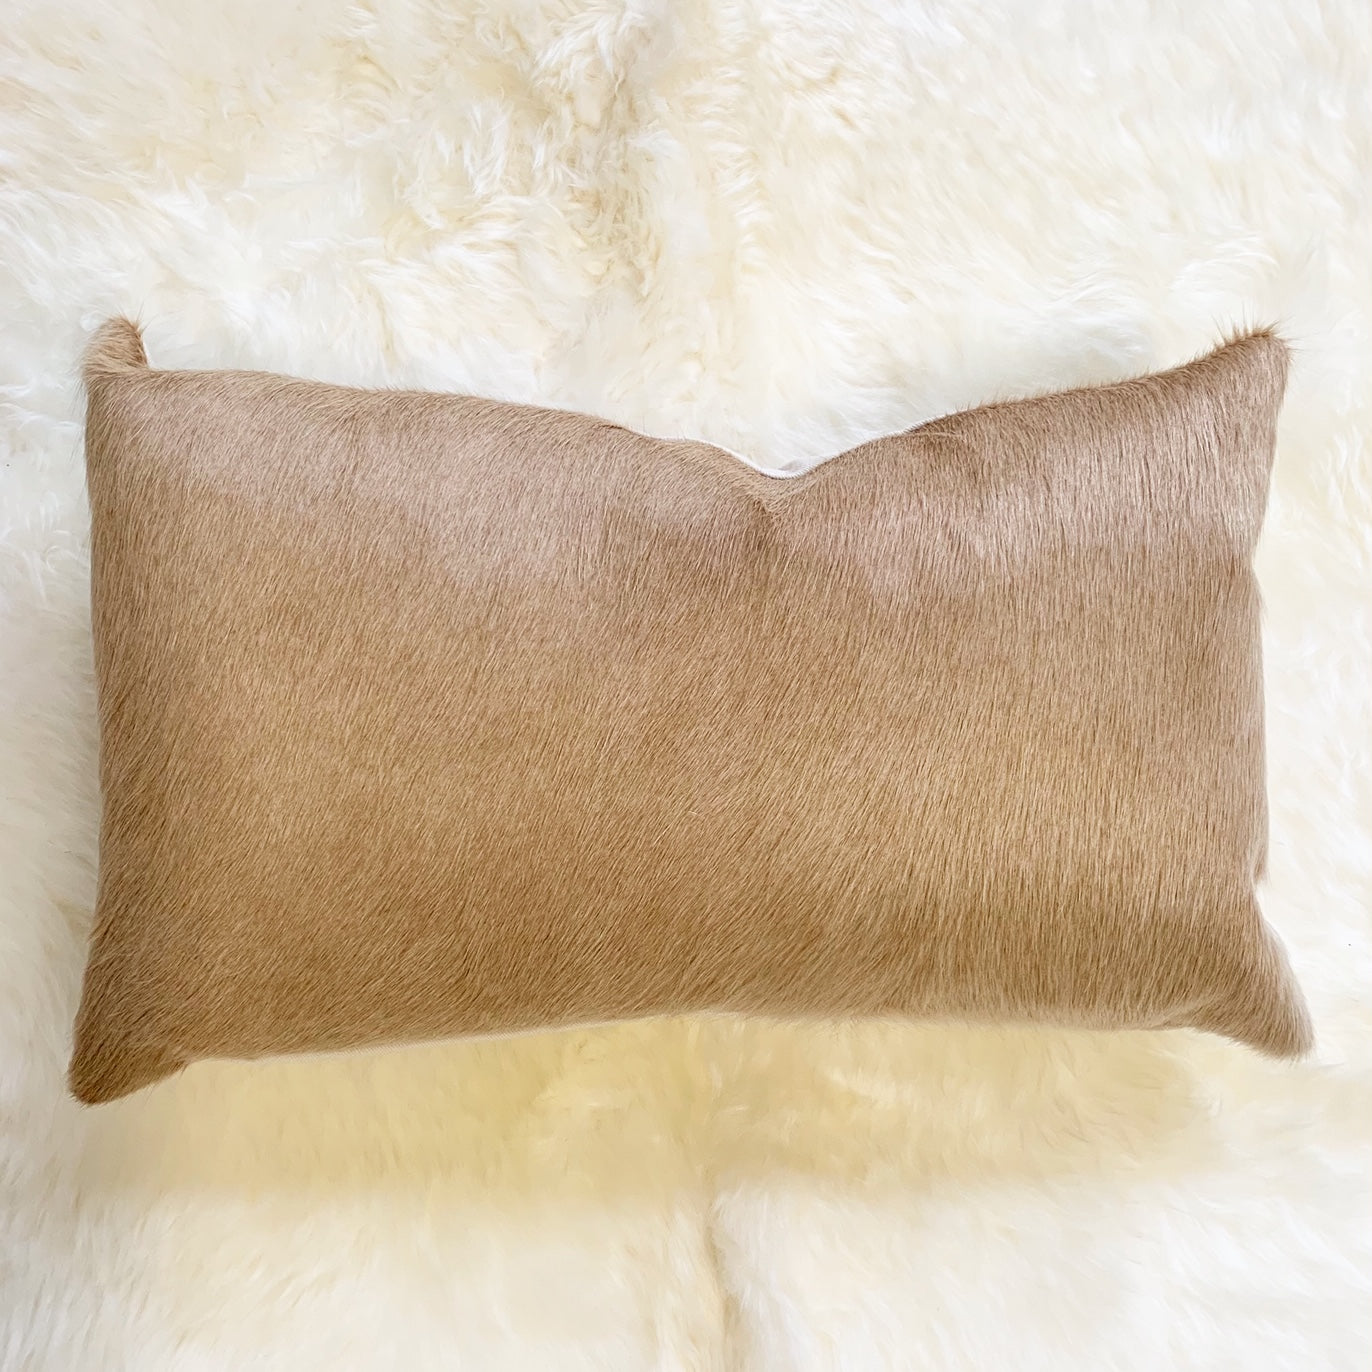 Palomino Cowhide Pillow, 21x13" - FORSYTH